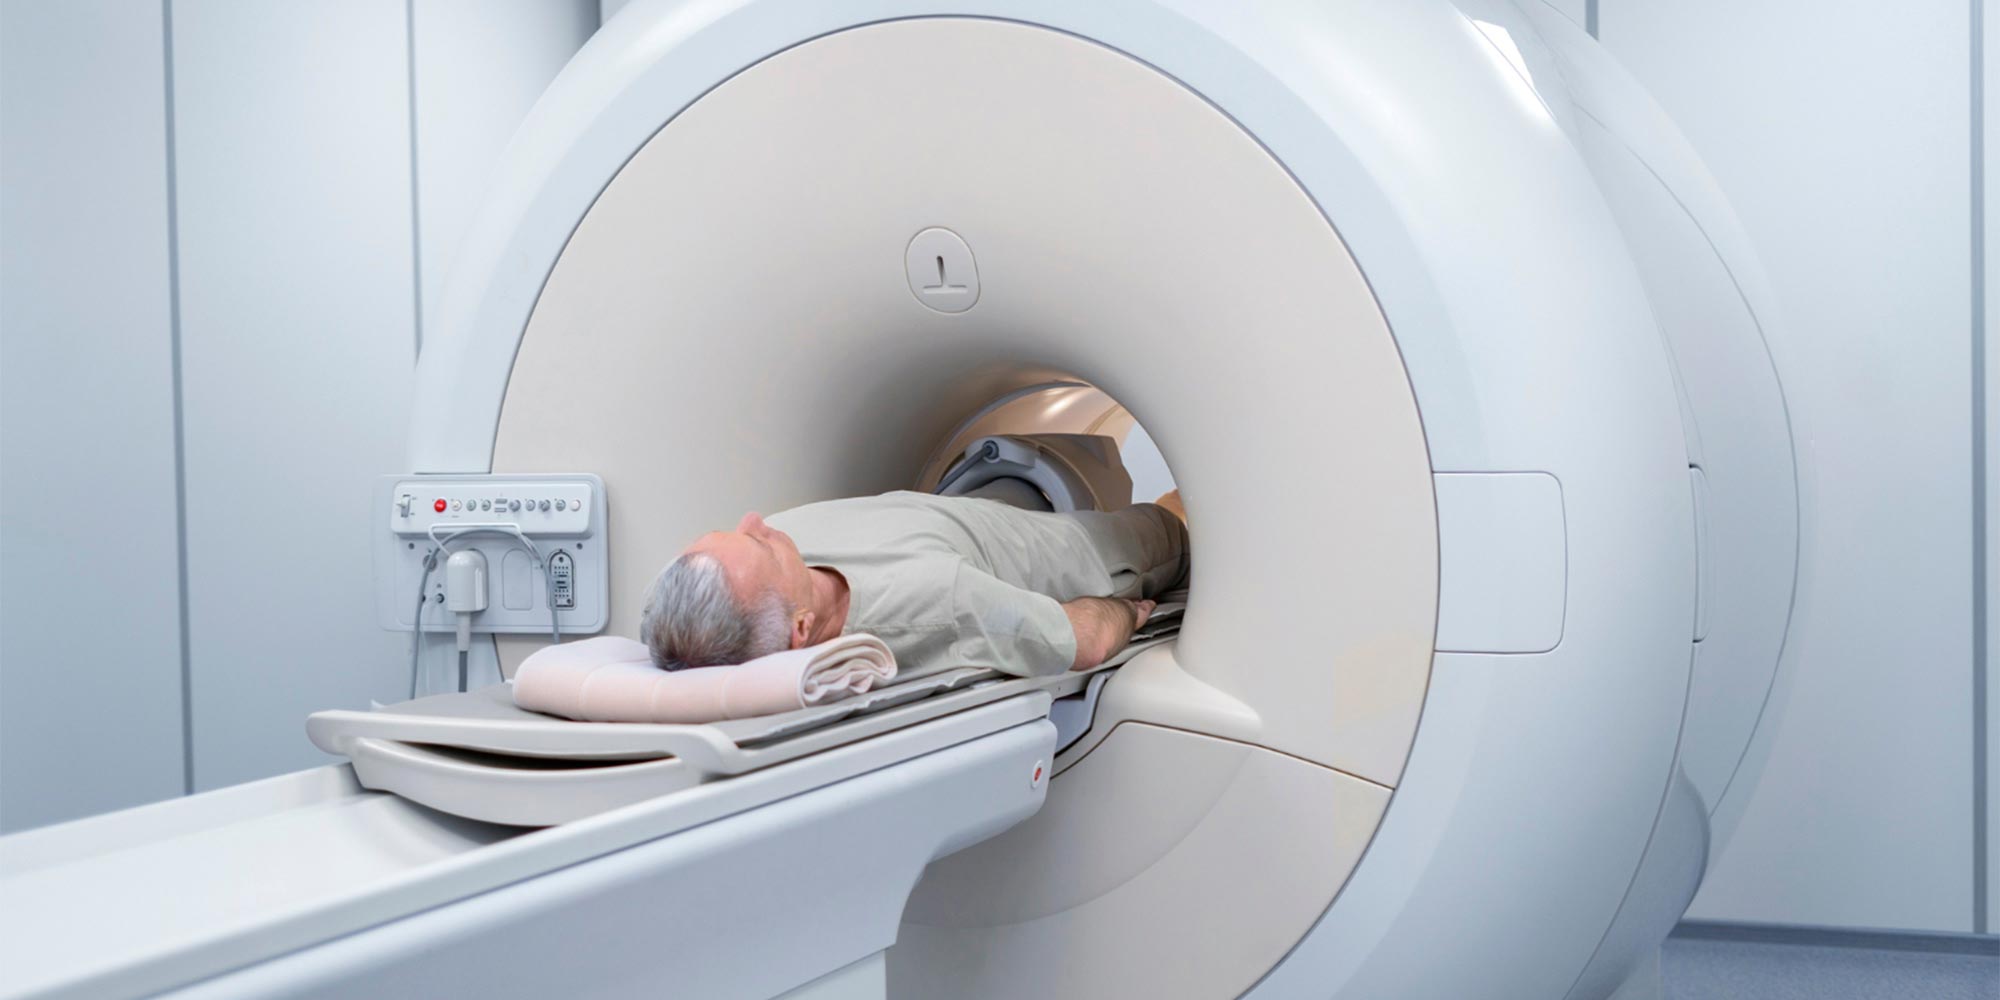 CT scan vs MRI scan: Which scan is better?